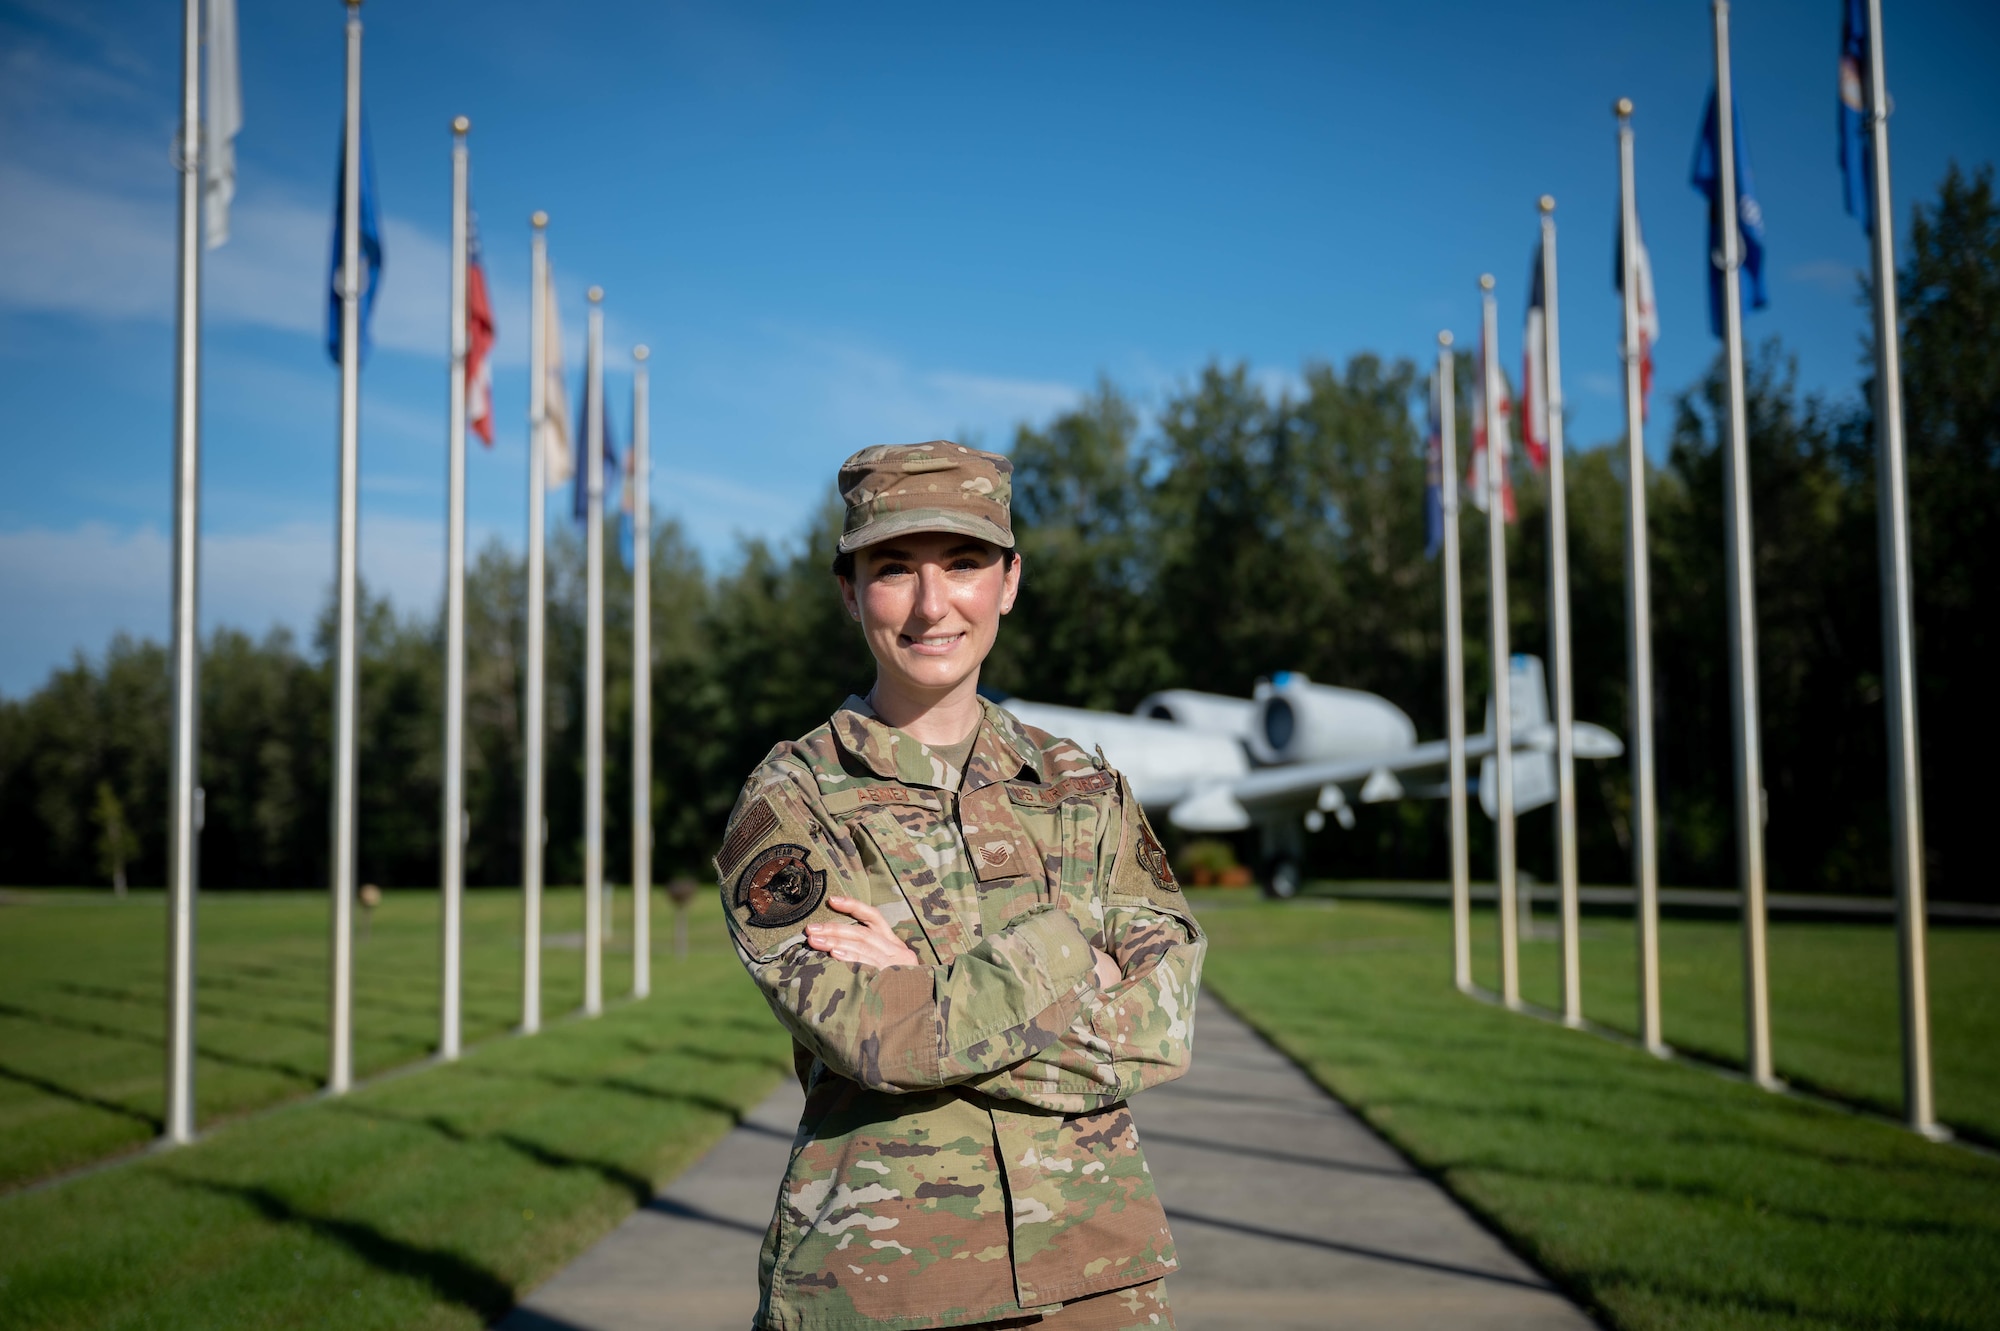 An Airman poses for a photo in the middle of two rows of flags.